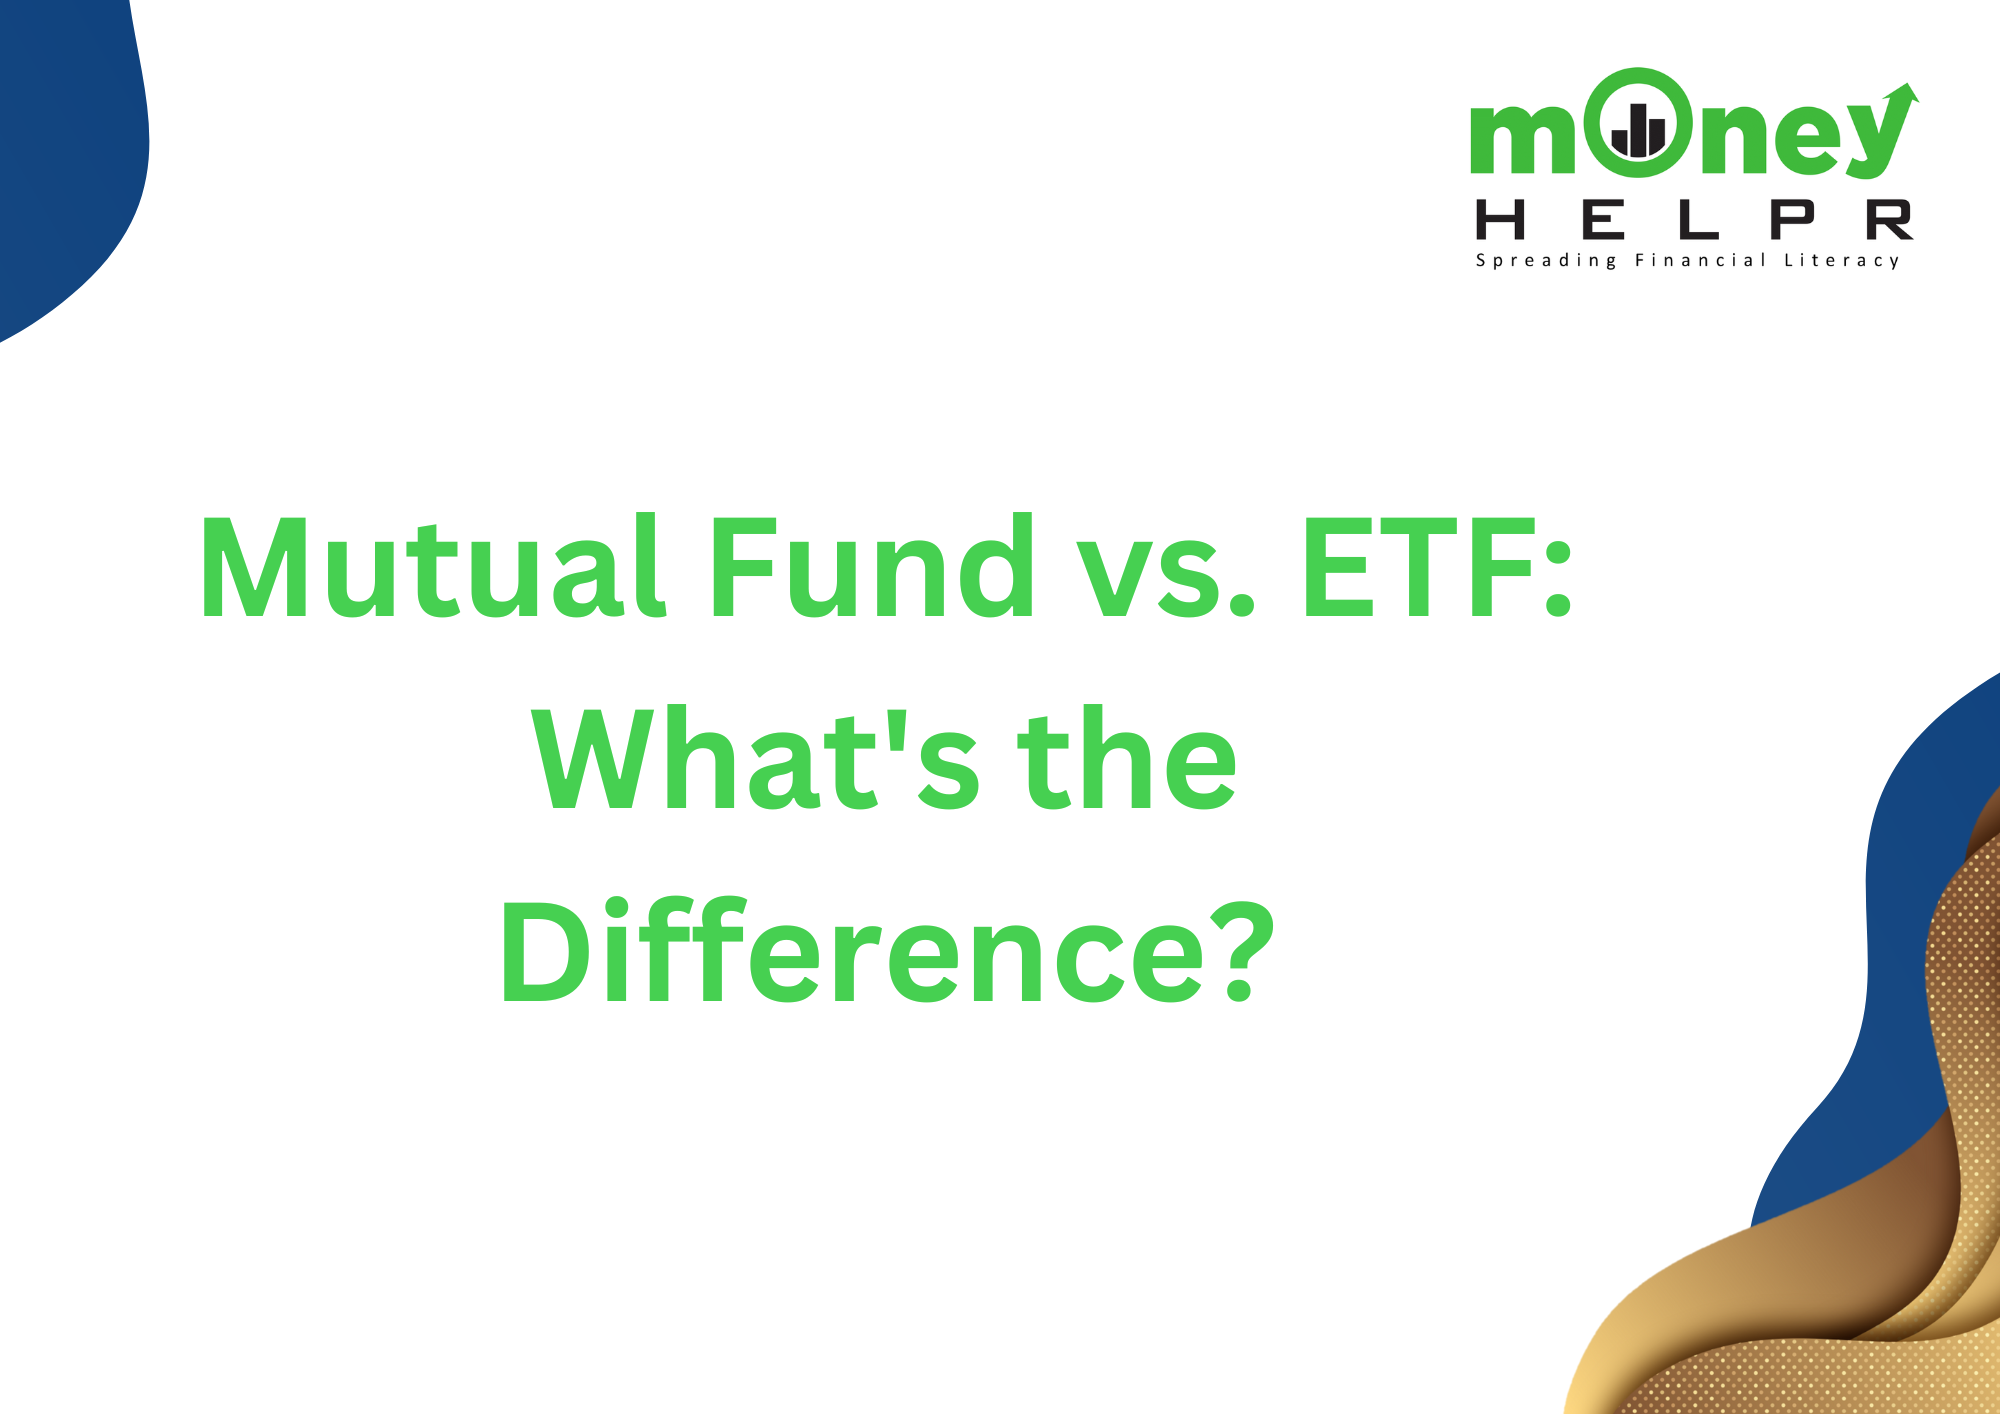 Mutual Fund vs. ETF: What’s the Difference?